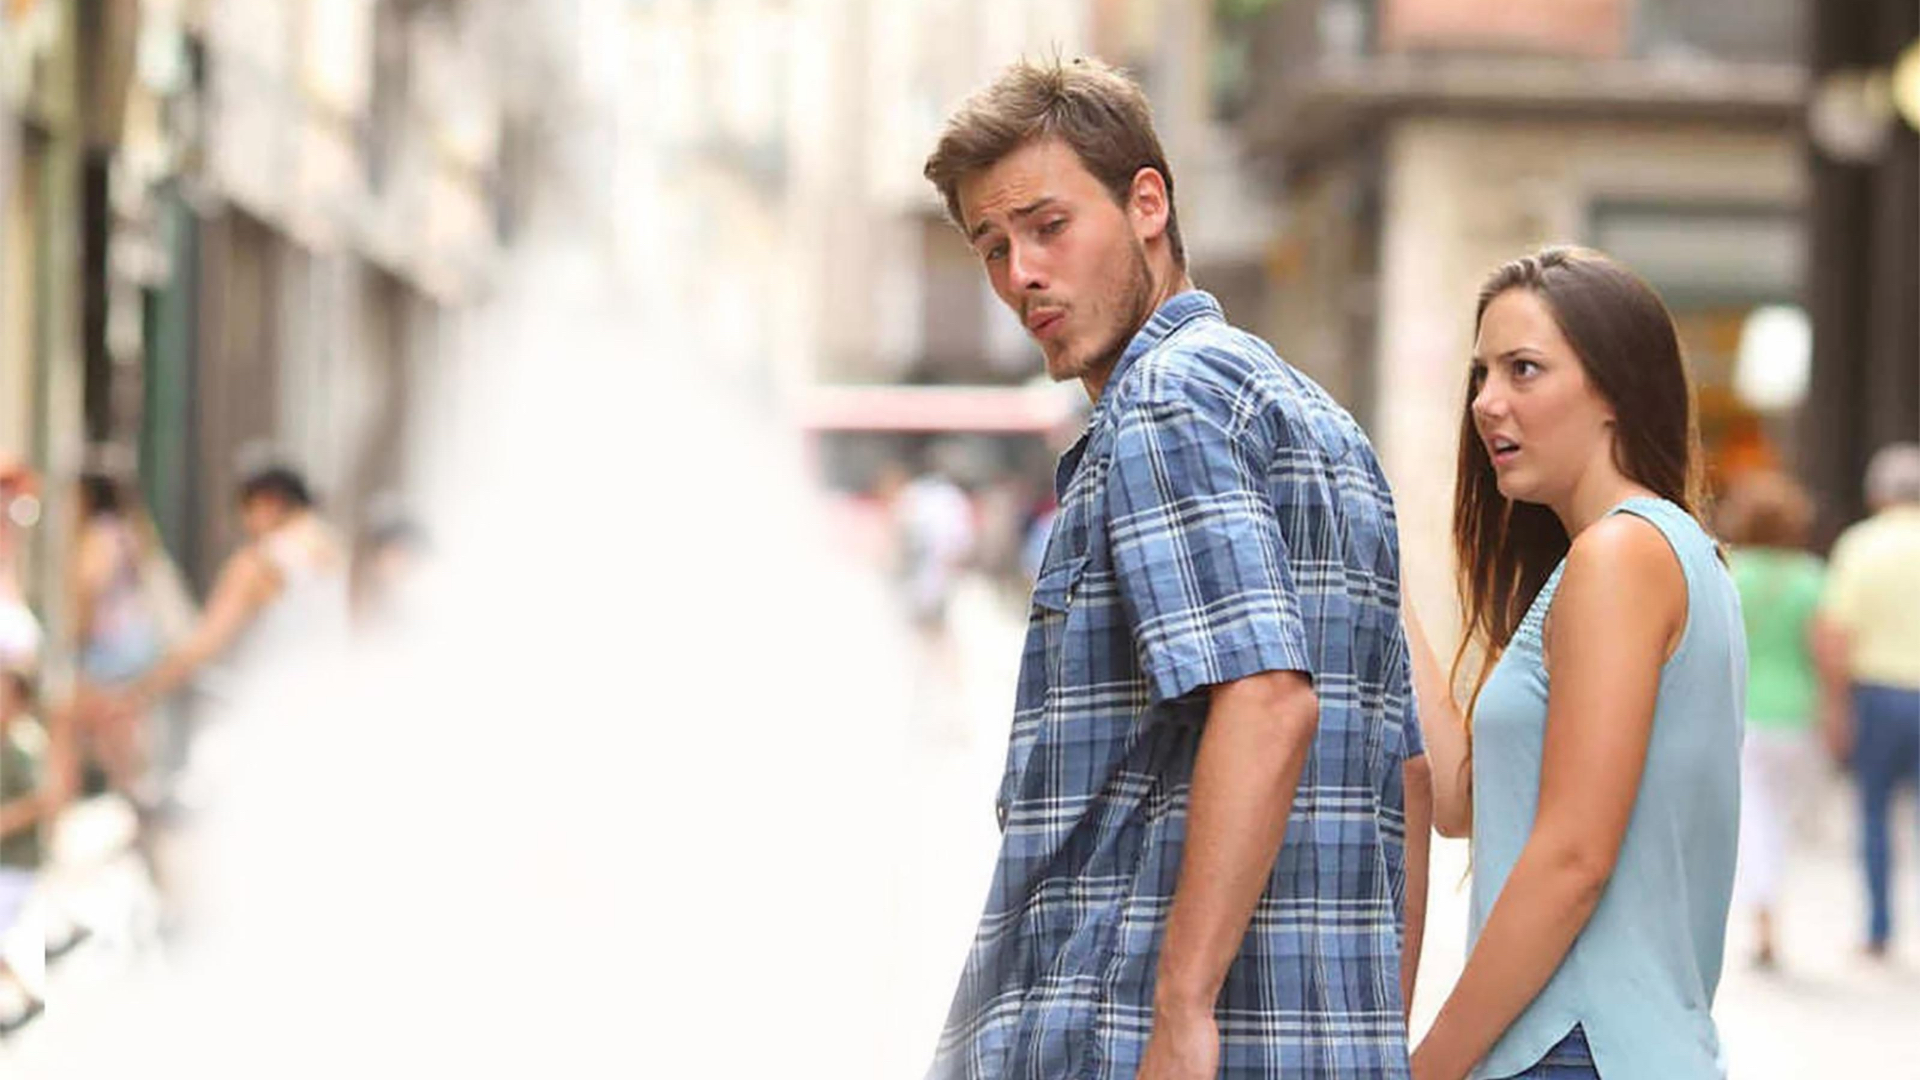 Distracted Boyfriend Meme background for your Online Meetings